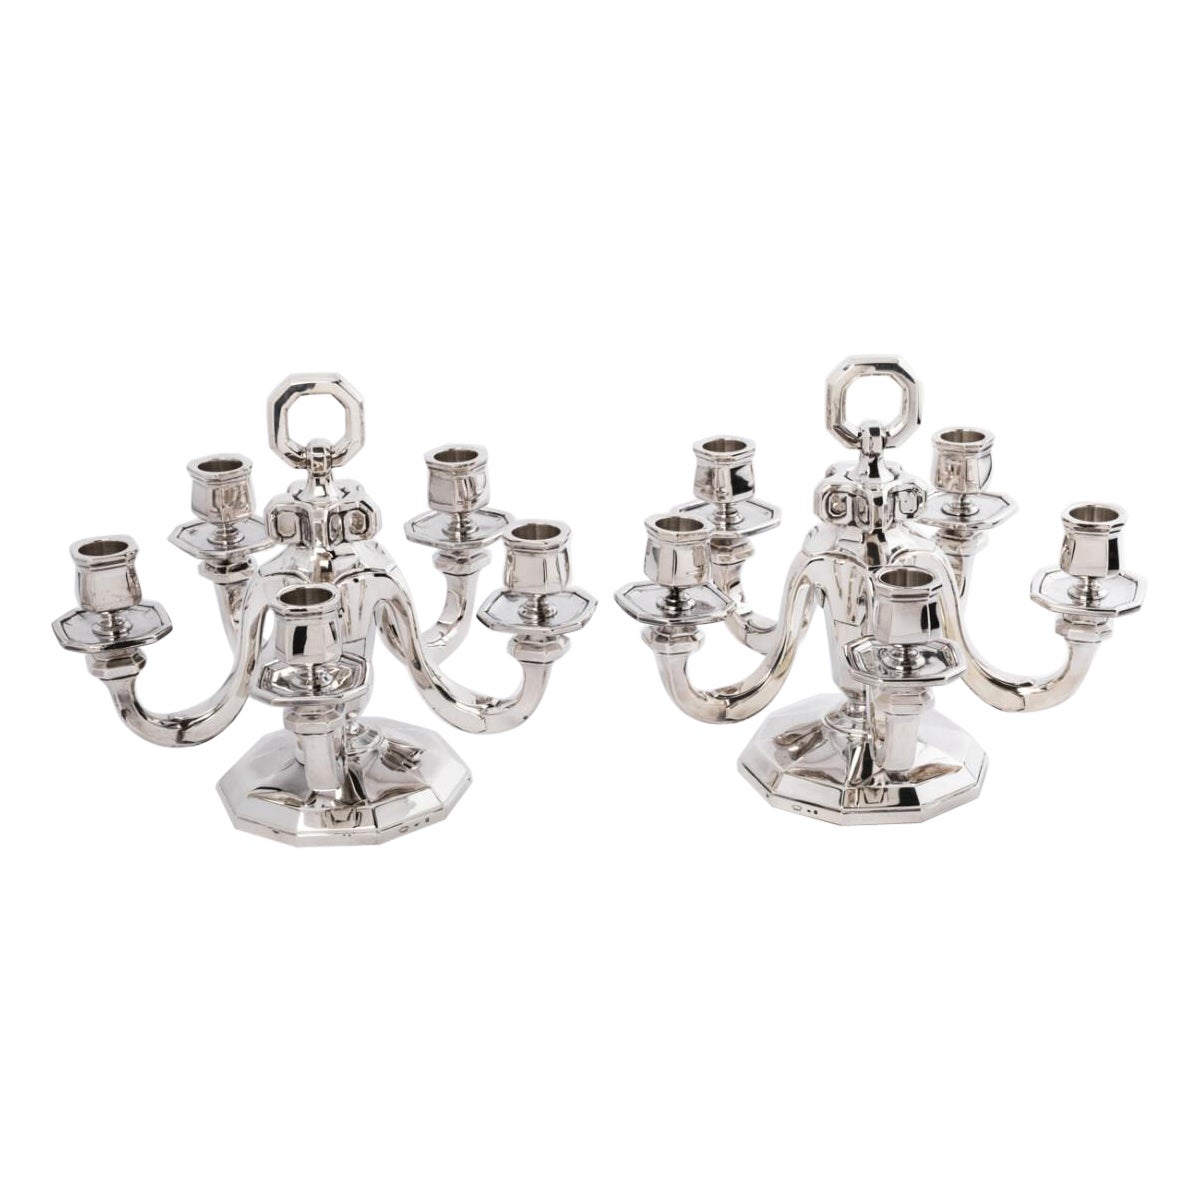 Goldsmith Gustave Keller Pair of candelabras in sterling silver, art deco period For Sale